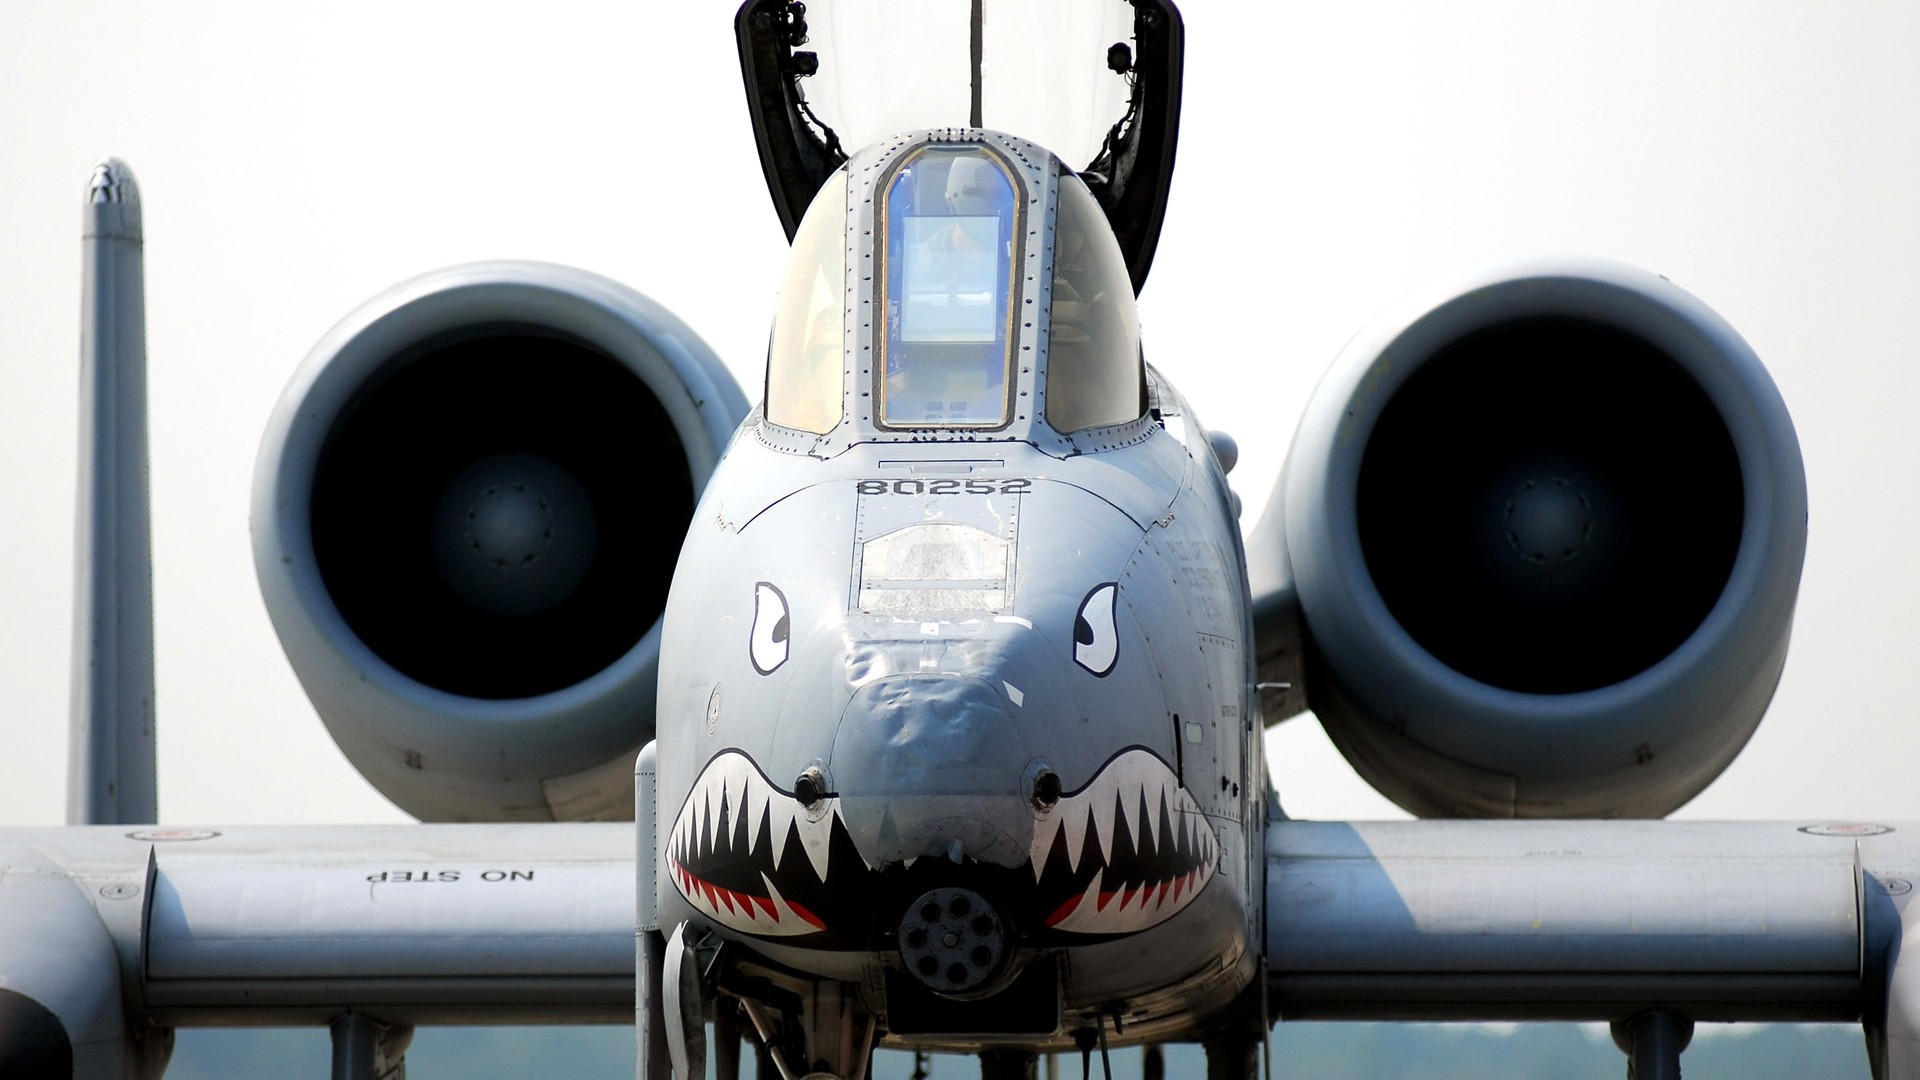 General 1920x1080 military aircraft airplane jets military aircraft Fairchild Republic A-10 Thunderbolt II military vehicle vehicle American aircraft pilot frontal view